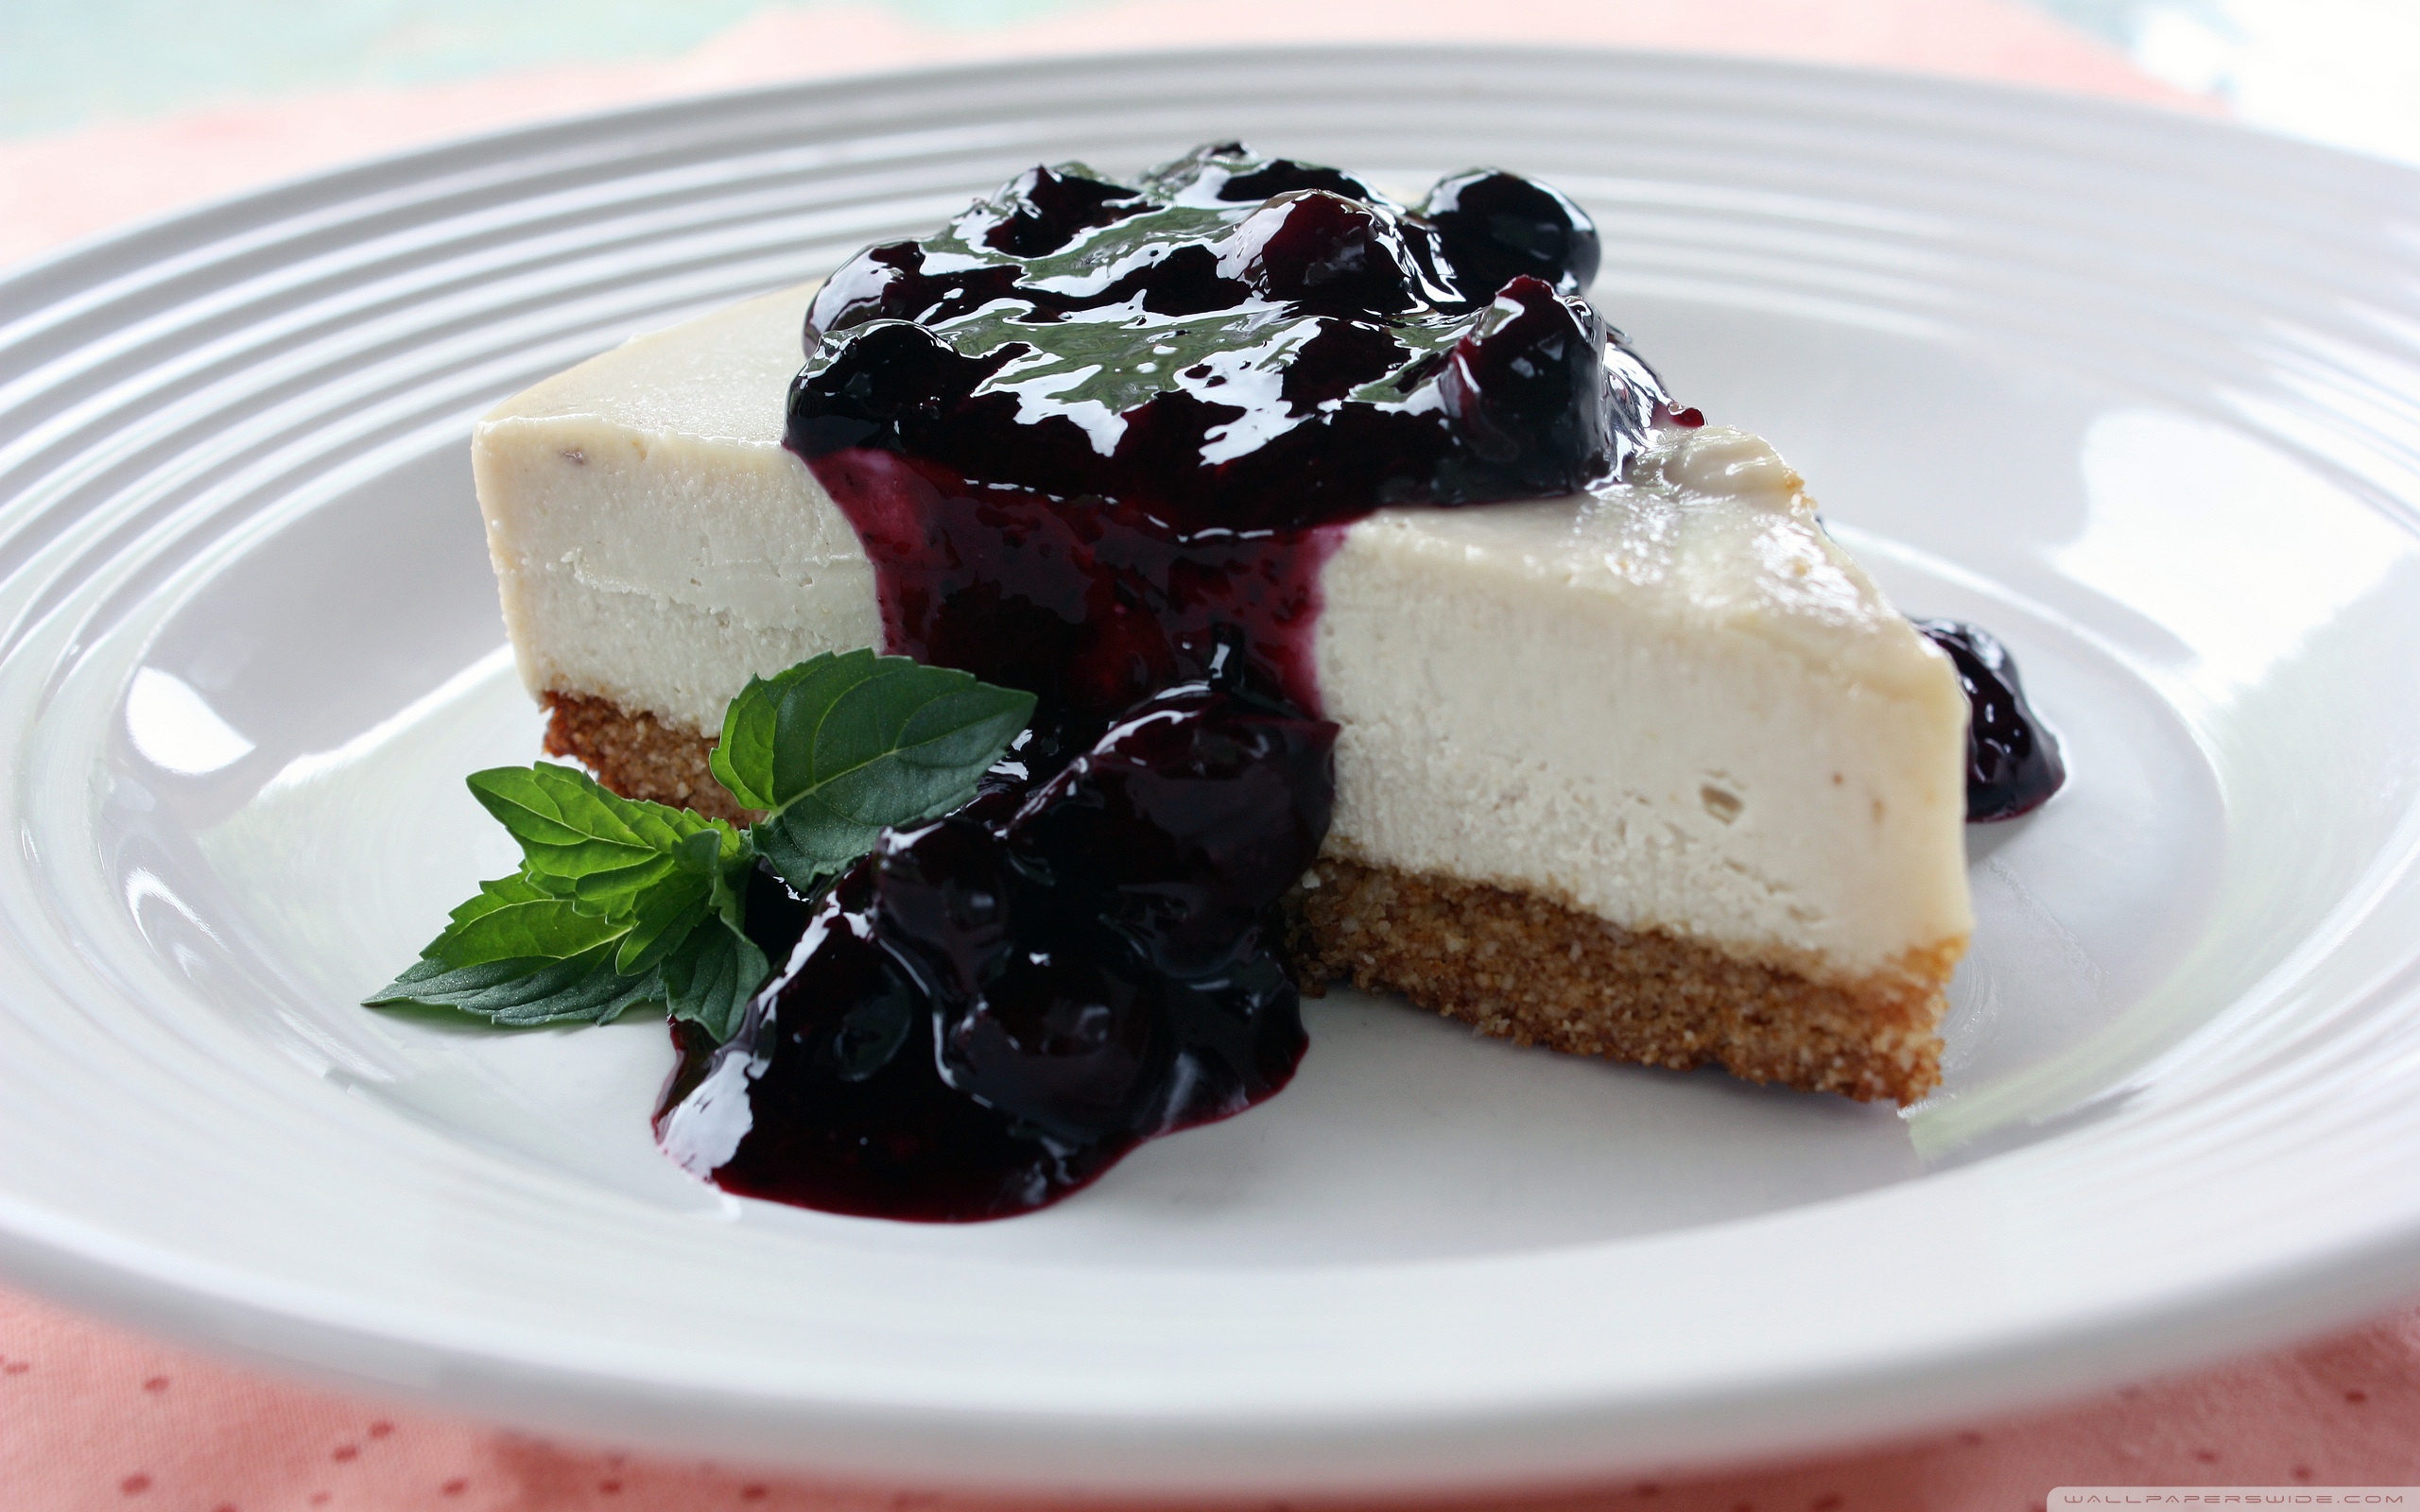 Cheese Cake With Blueberry Sauce 4k HD Desktop Wallpaper For